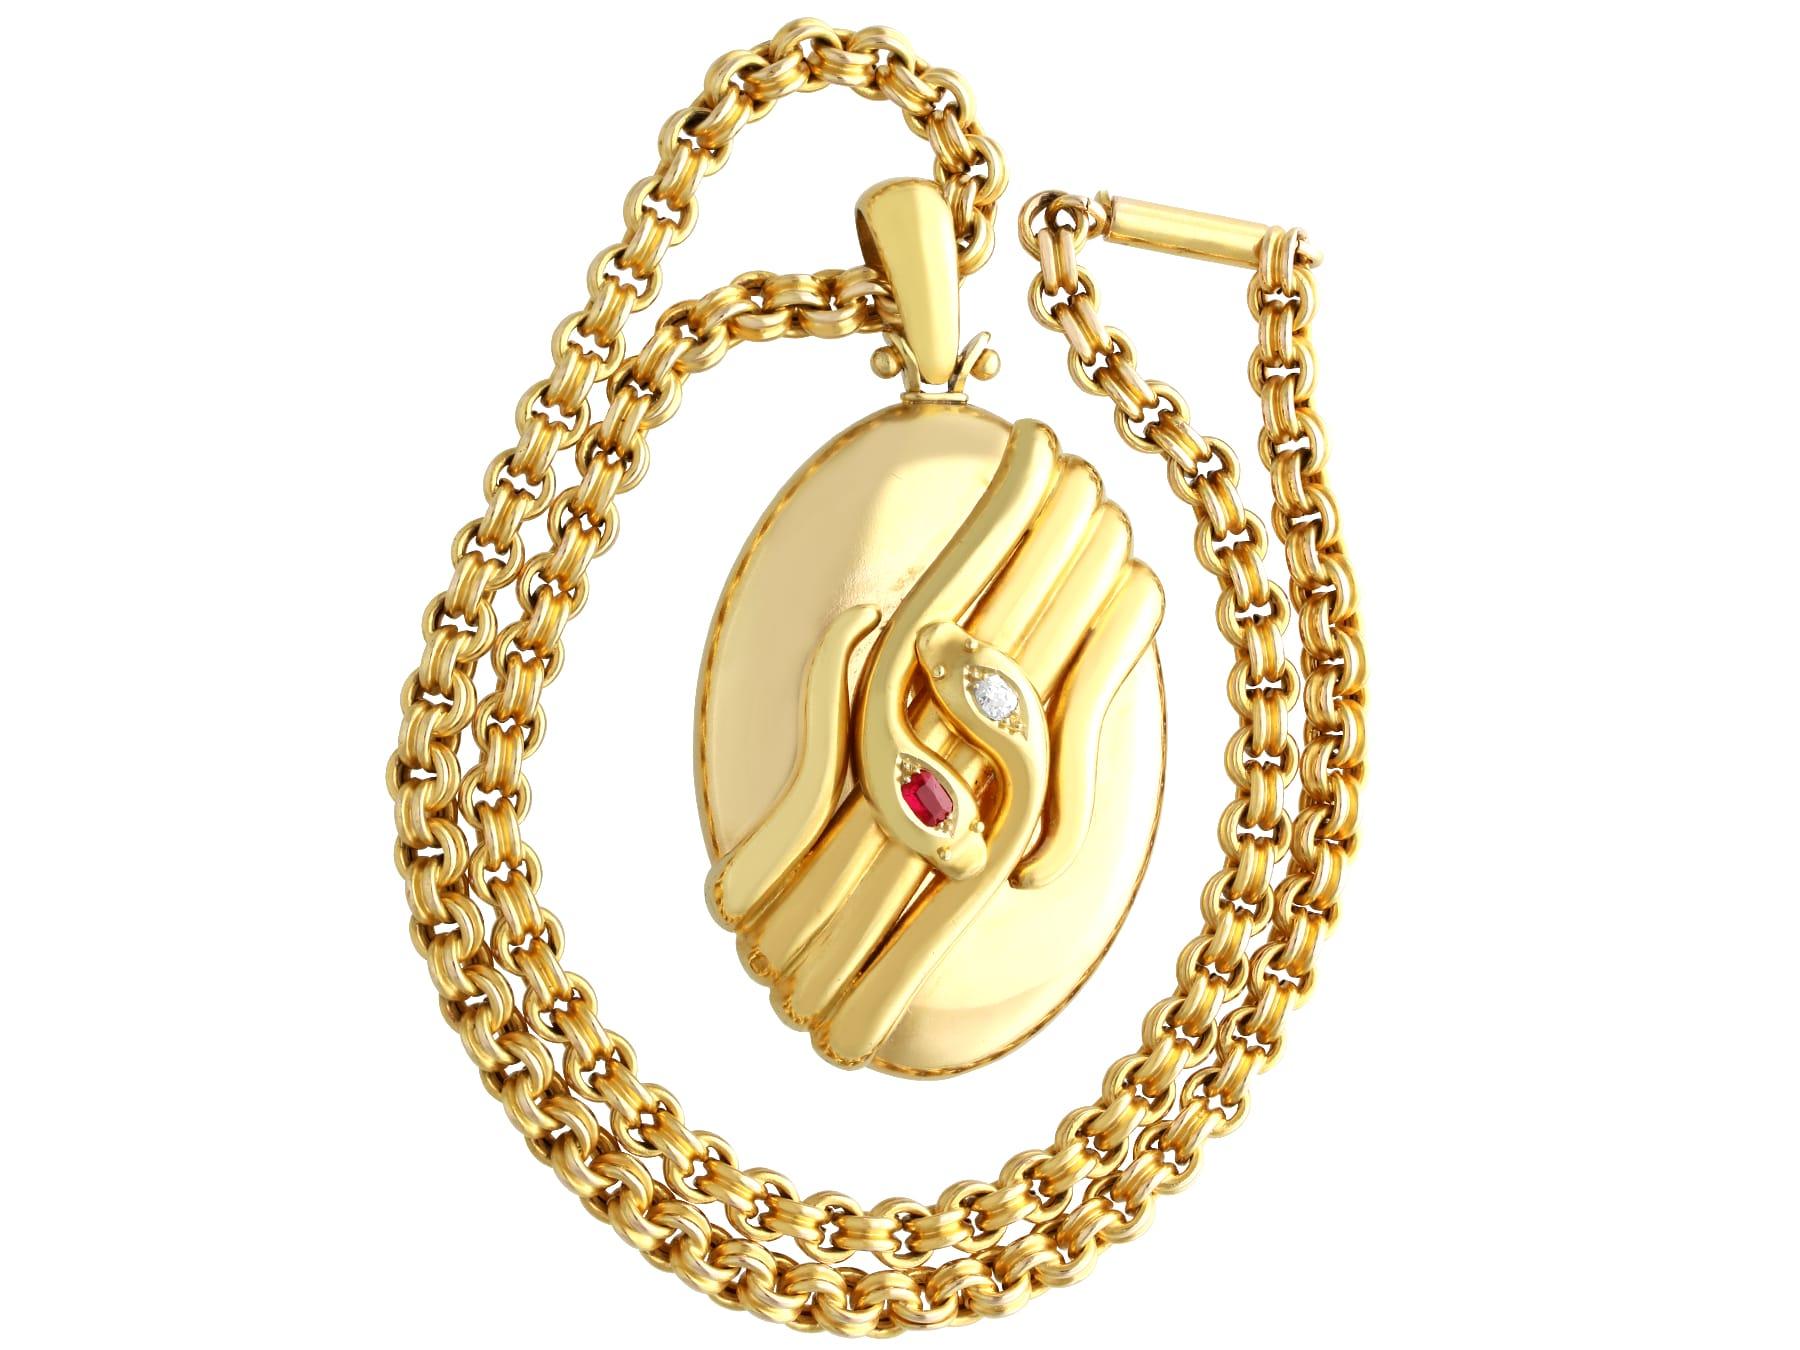 Cushion Cut Antique Ruby and Diamond 18k Yellow Gold Locket Pendant Circa 1880 For Sale